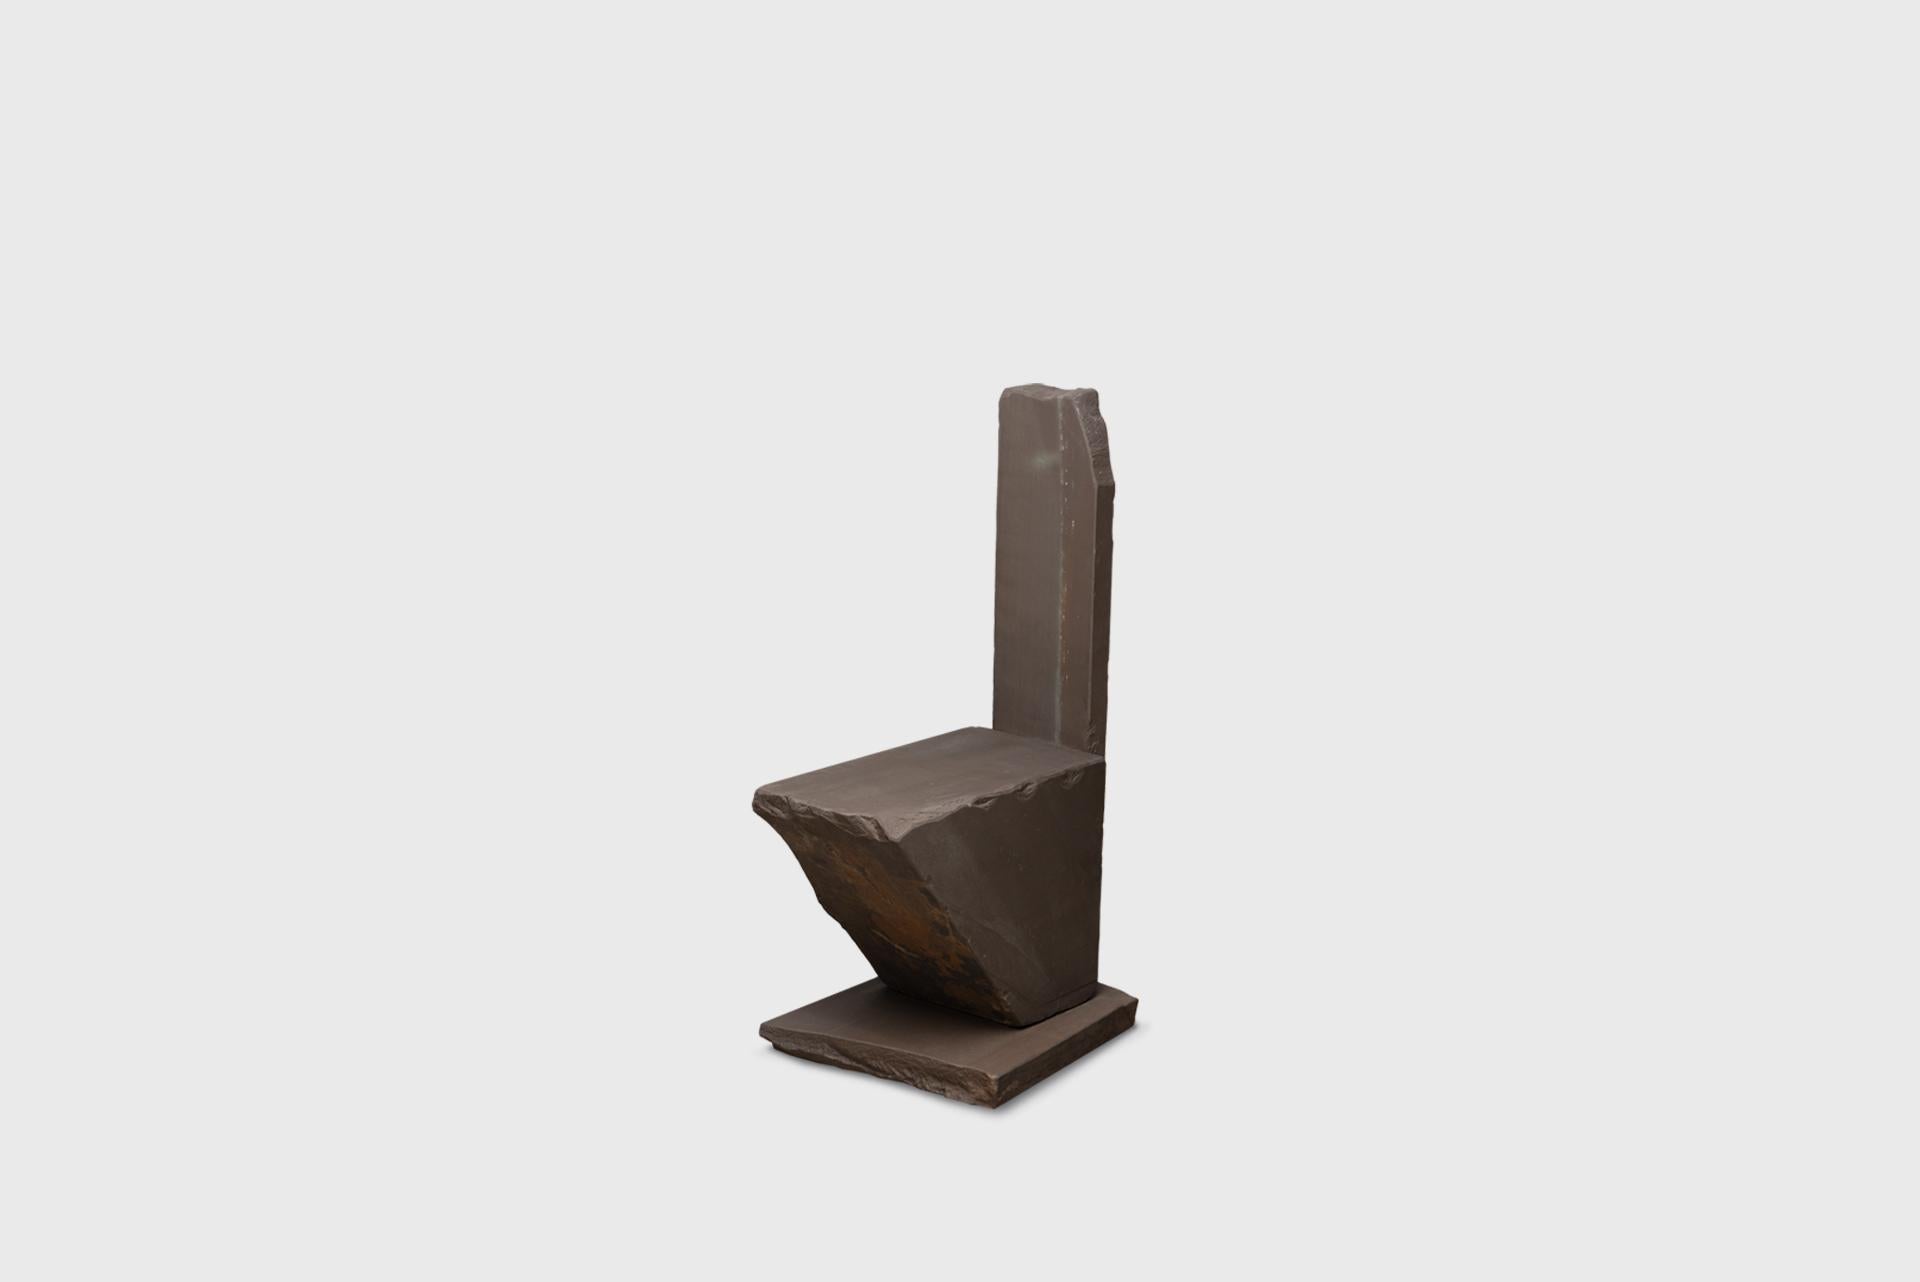 Contemporary Natural Chair 15, Graywacke Offcut Gray Stone, Carsten in der Elst For Sale 3